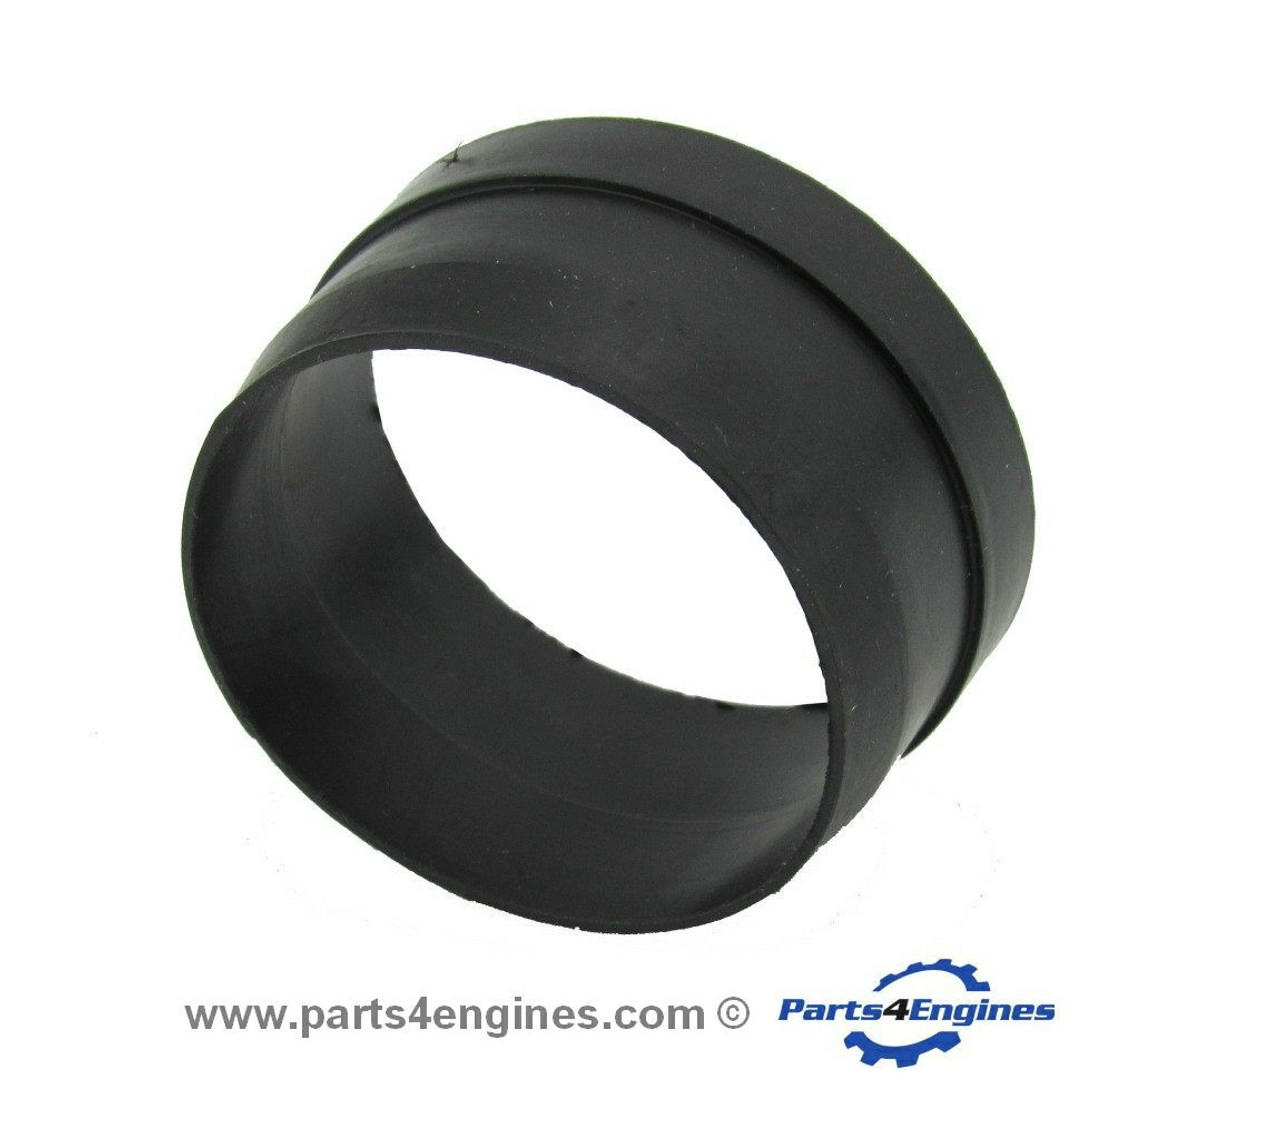 Perkins Prima M50 Heat exchanger tube stack seal from parts4engines.com